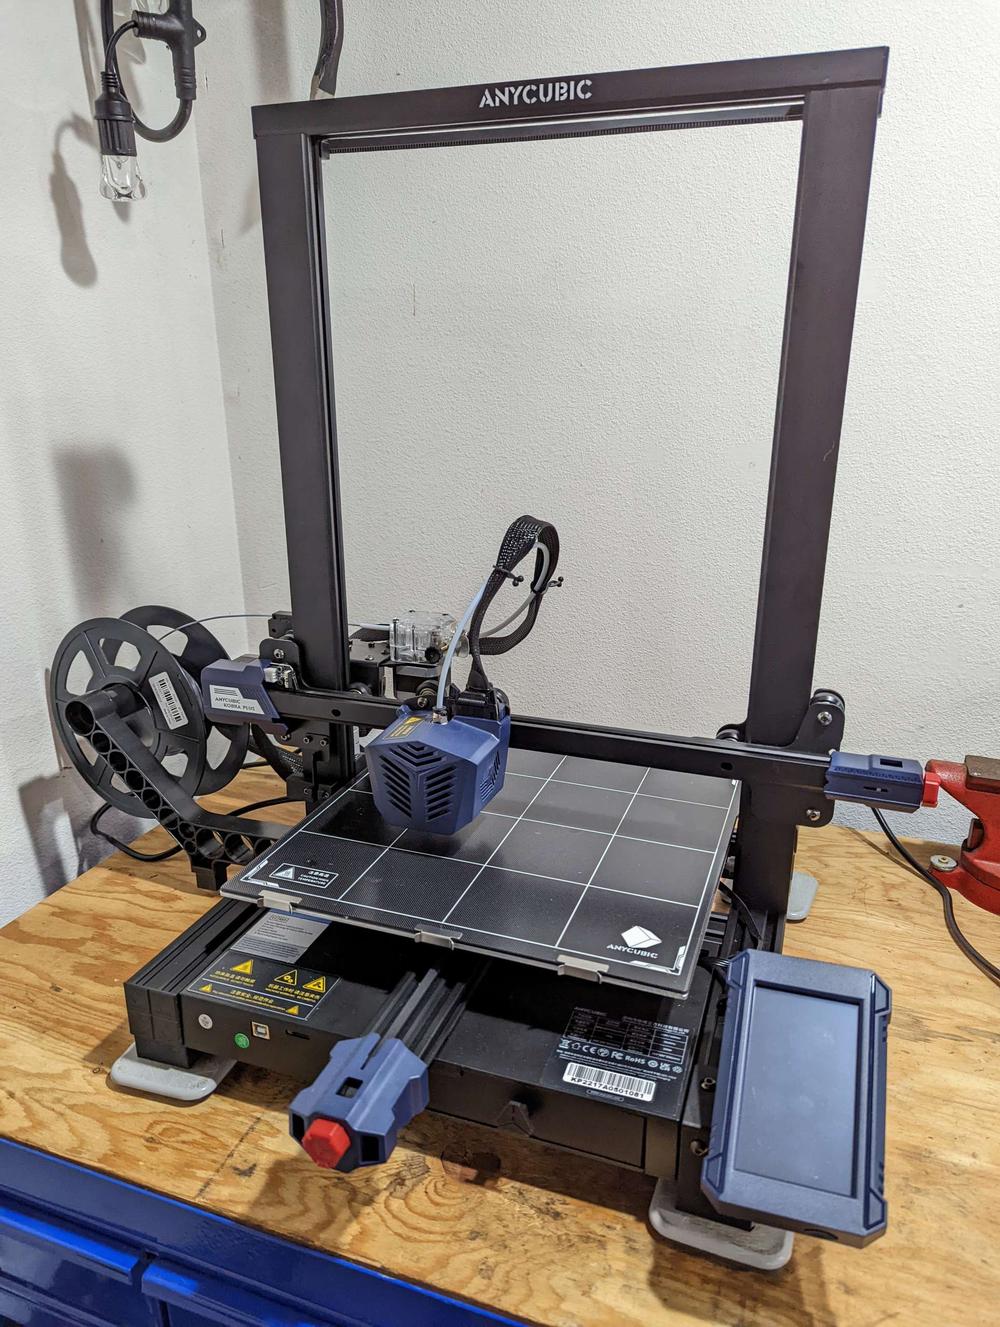 A black and blue Anycubic Mega X 3D printer is printing a blue object on a glass bed.